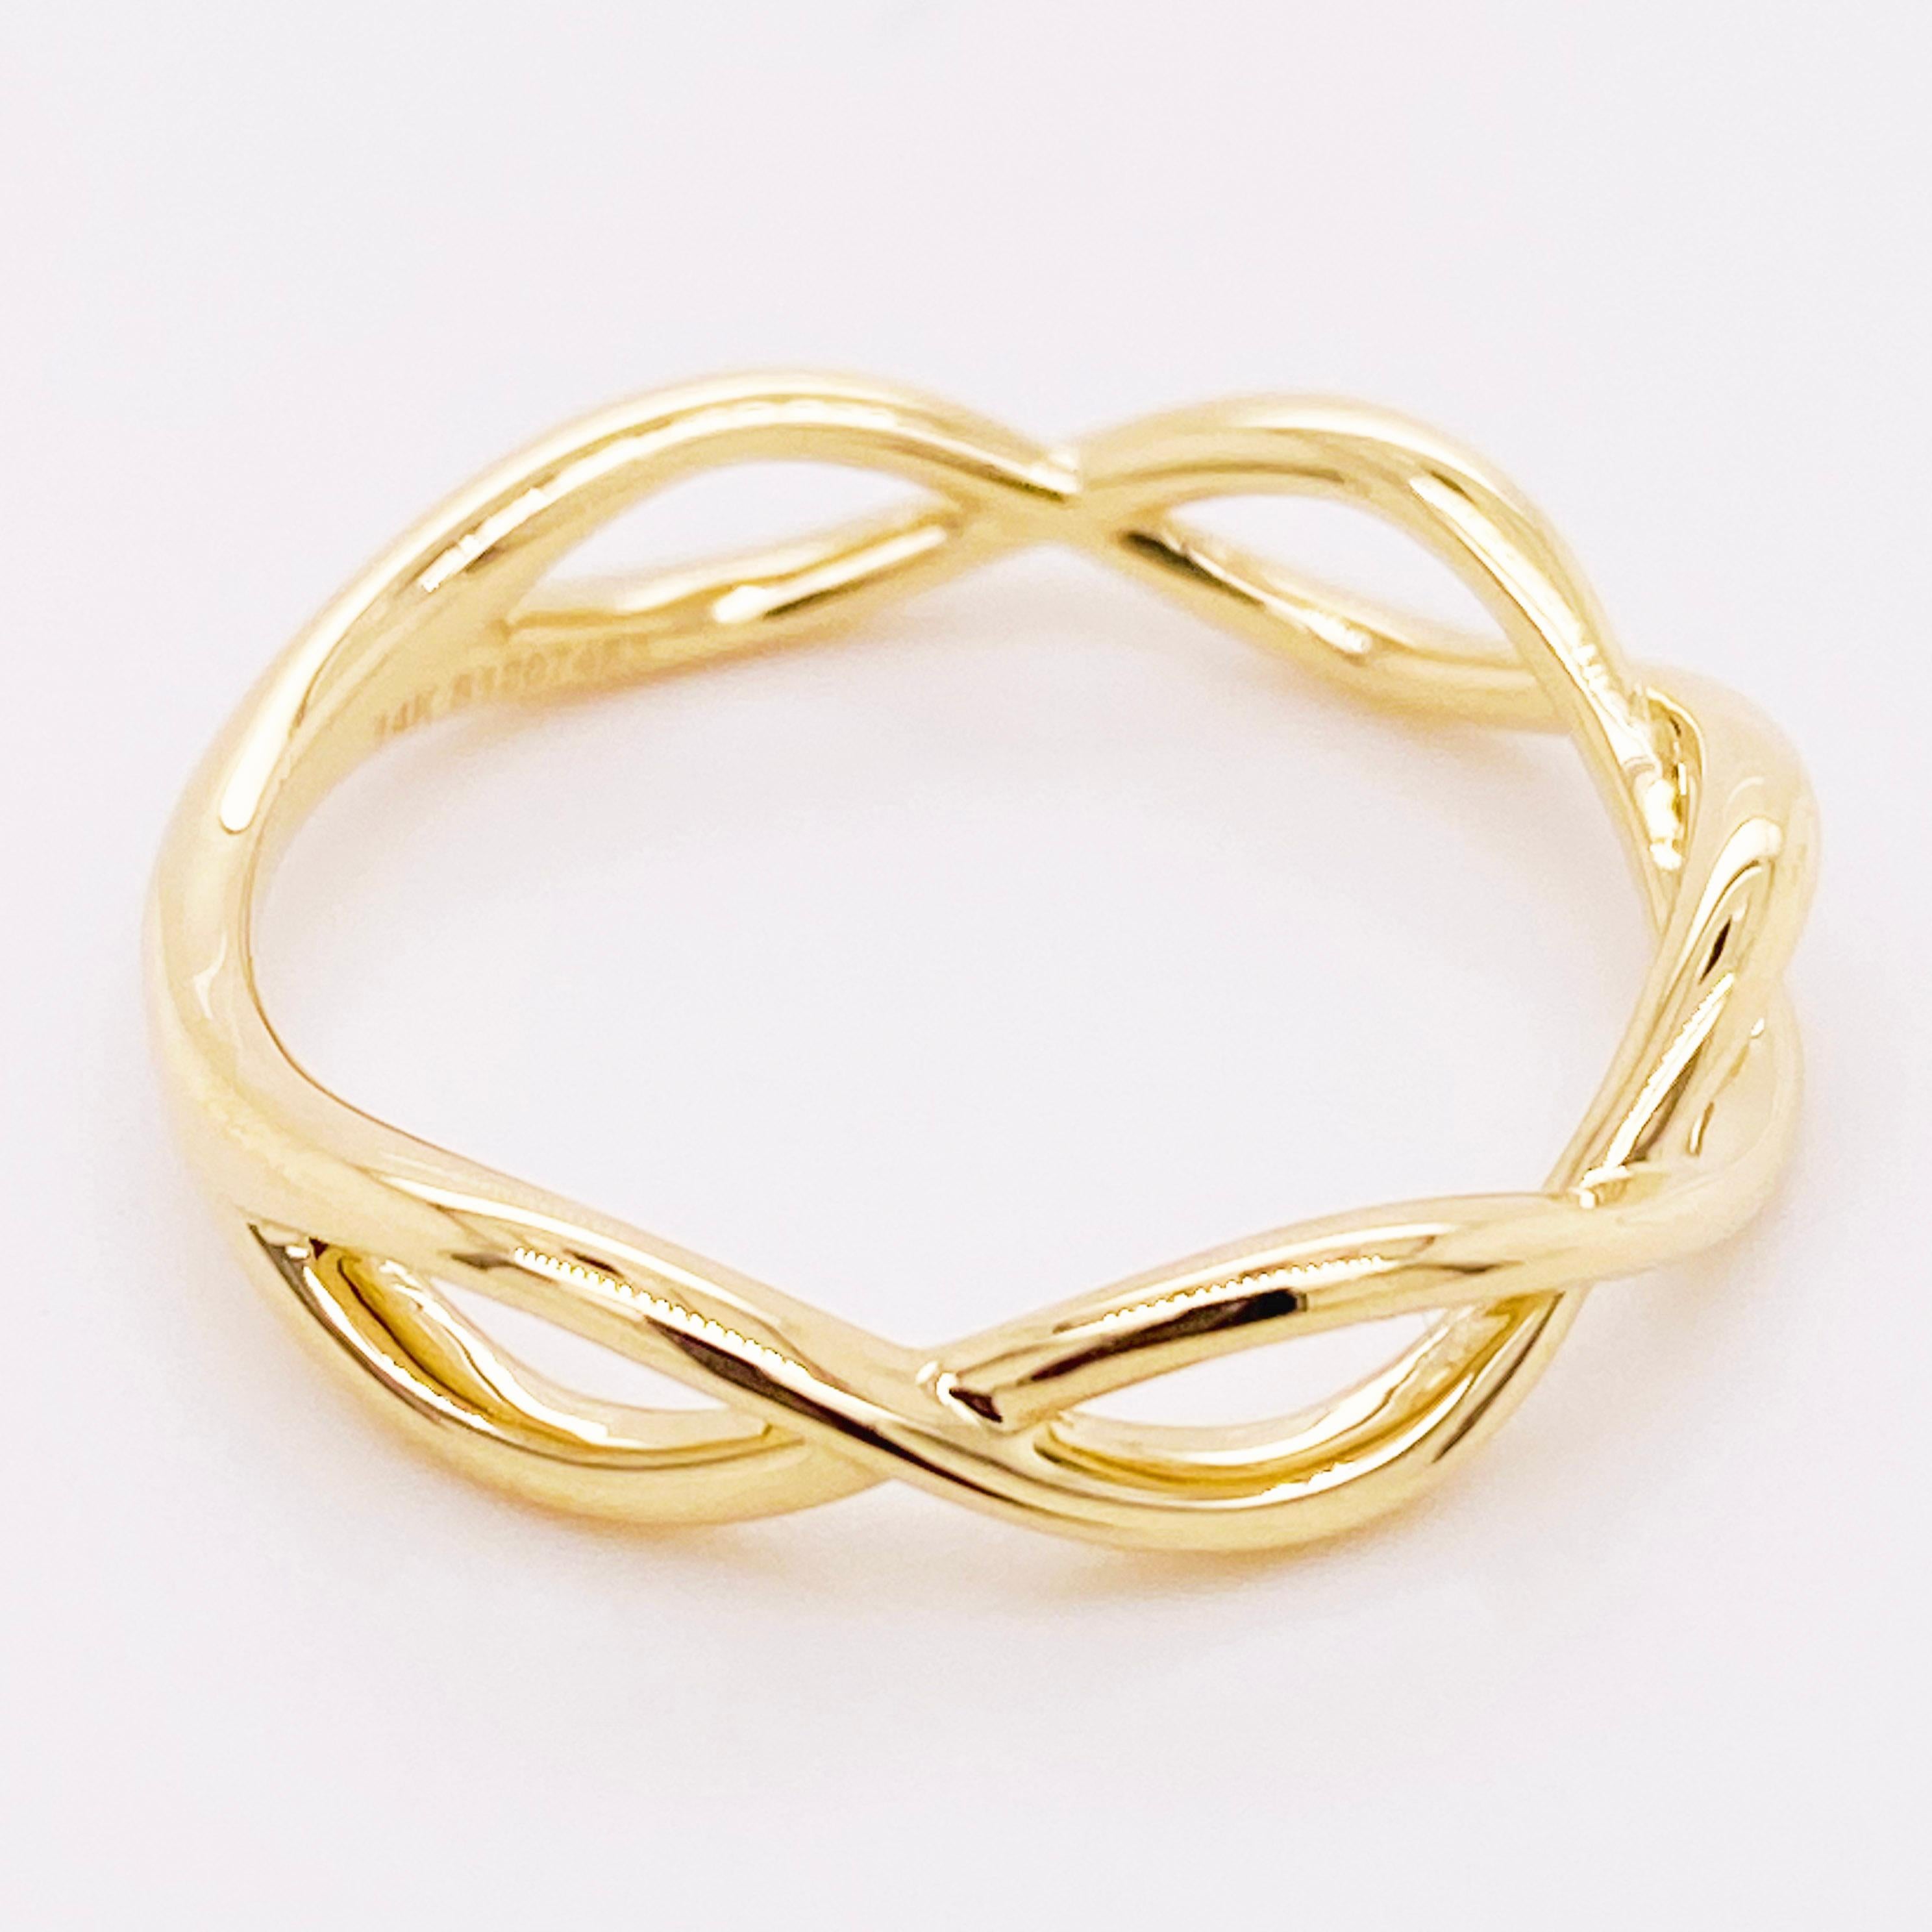 Gold Twisted Ring, 14 Karat Yellow Gold Twisted Stackable Band, LR51926Y4JJJ In New Condition For Sale In Austin, TX